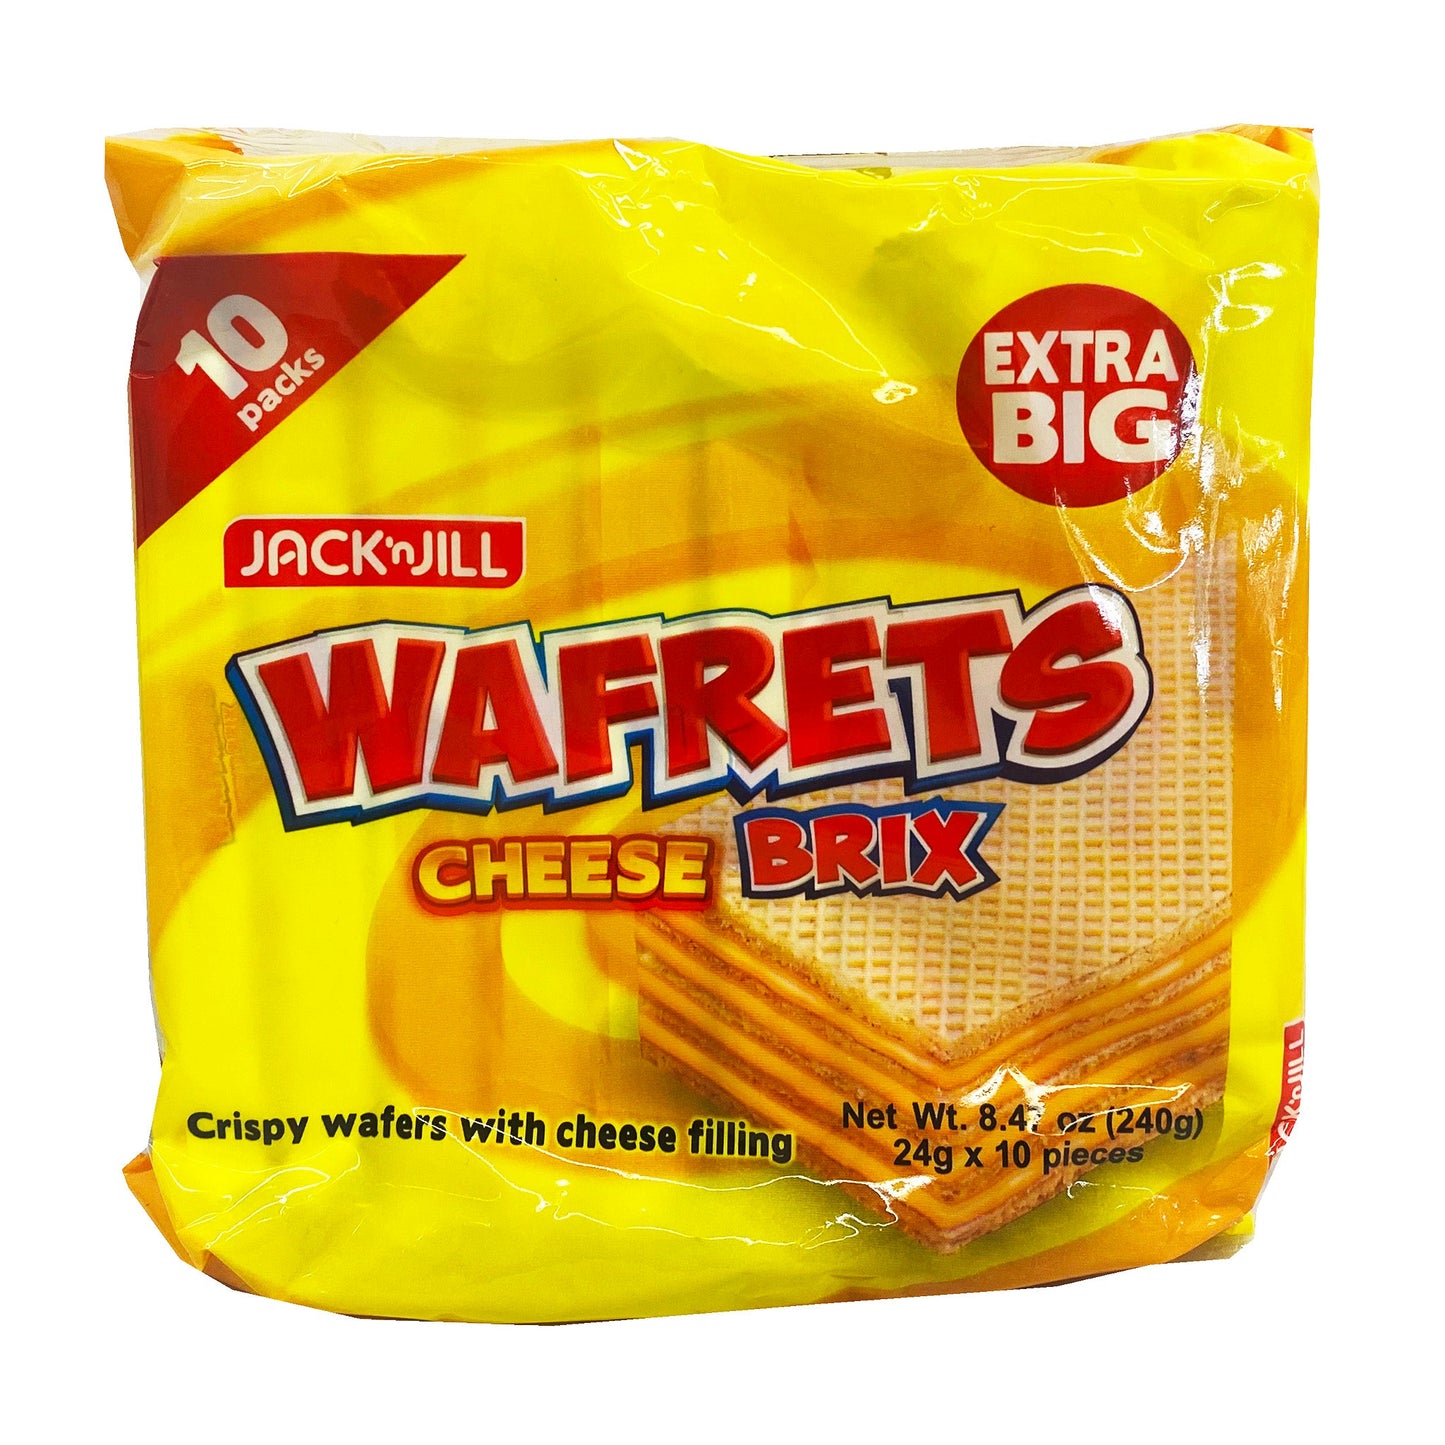 Front graphic image of Jack n' Jill Wafrets Brix - Cheese 8.4oz